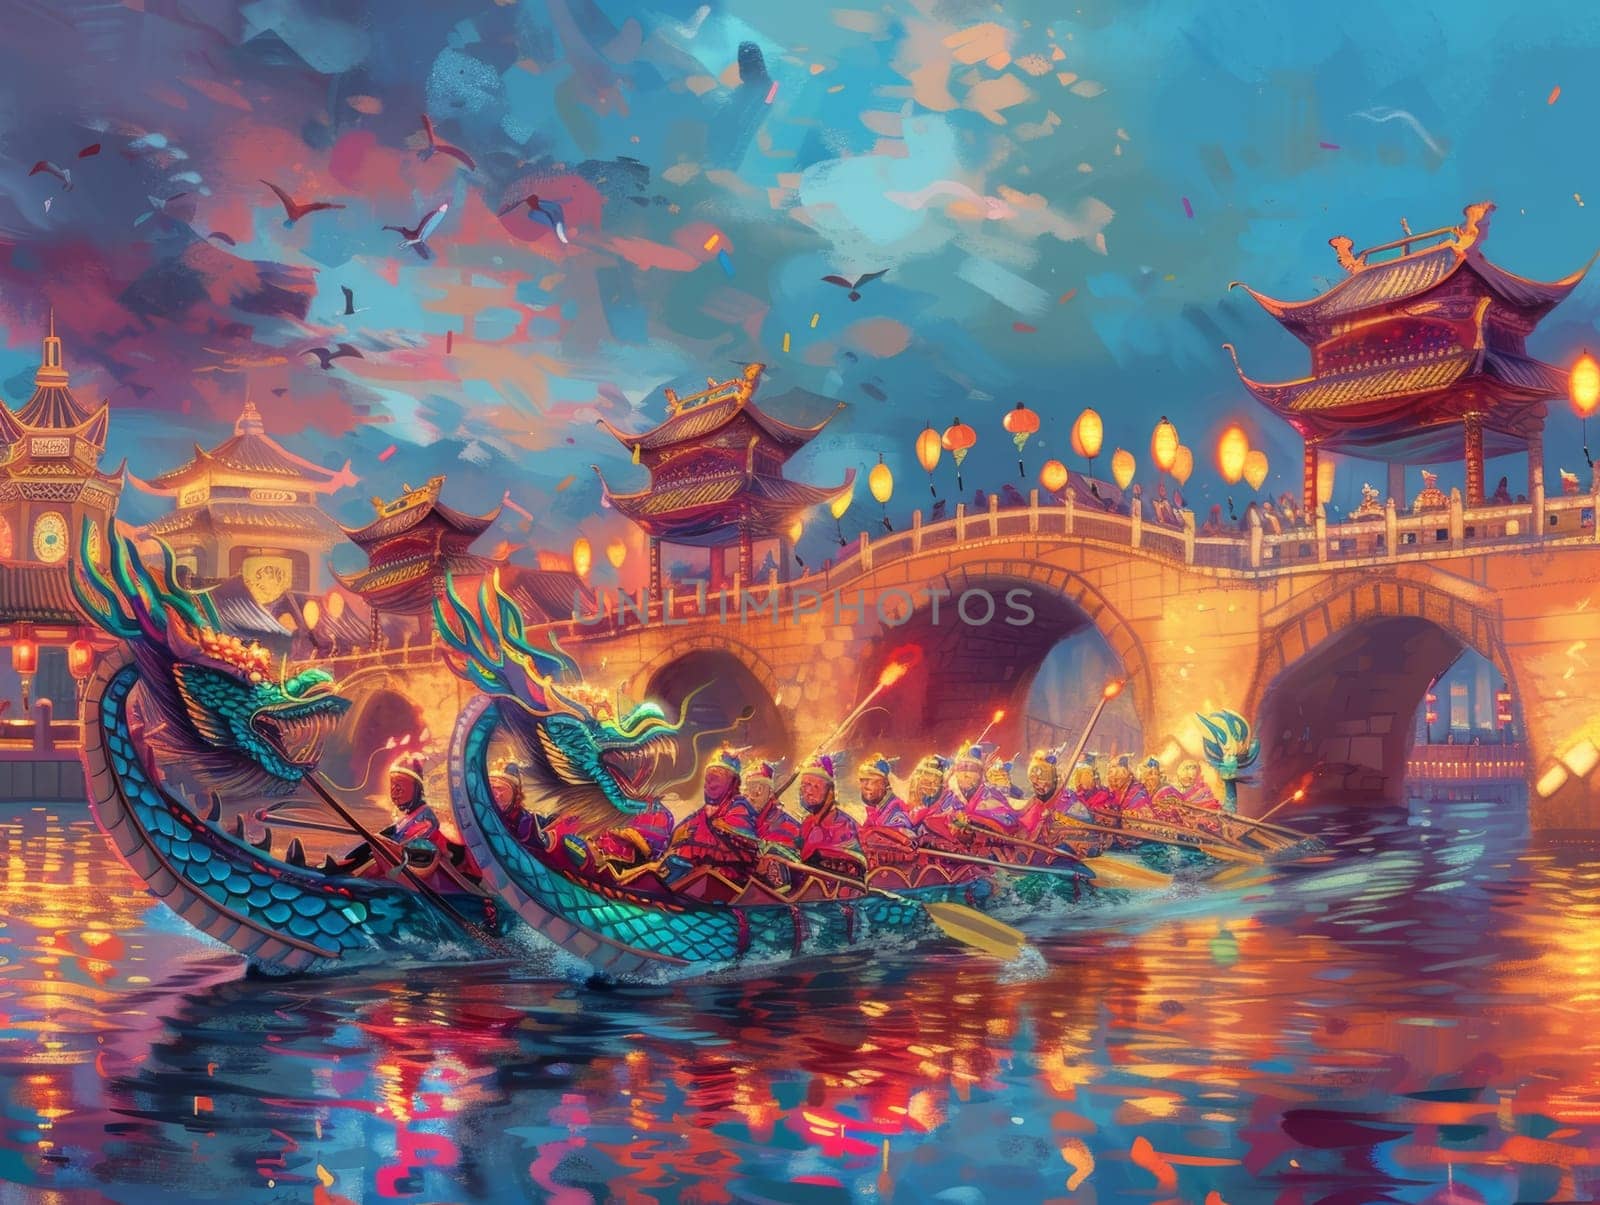 A vivid illustration of dragon boats engaging in a spirited race under a festively lit bridge, capturing the dynamic energy of a traditional Asian festival at dusk. by sfinks